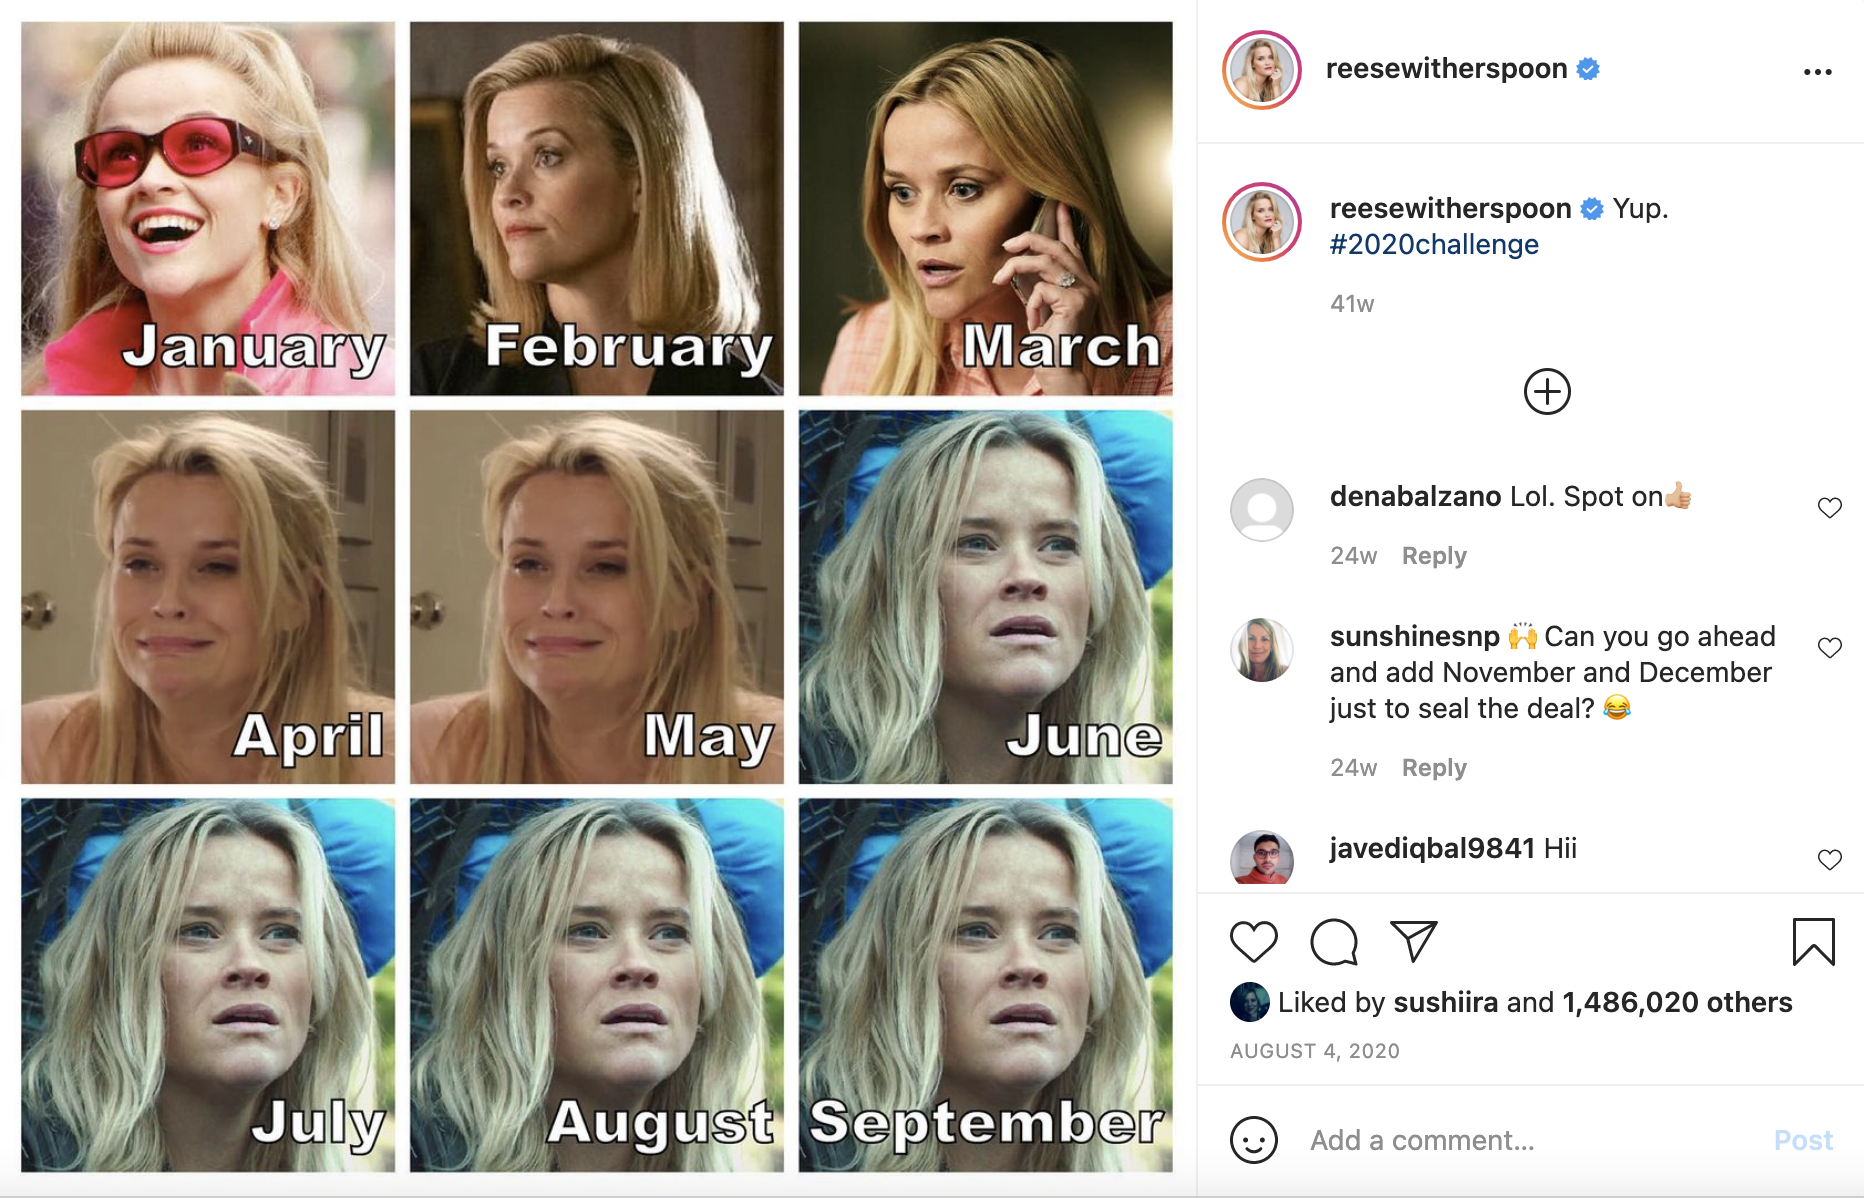 Social media #2020challenge with Reese Witherspoon.